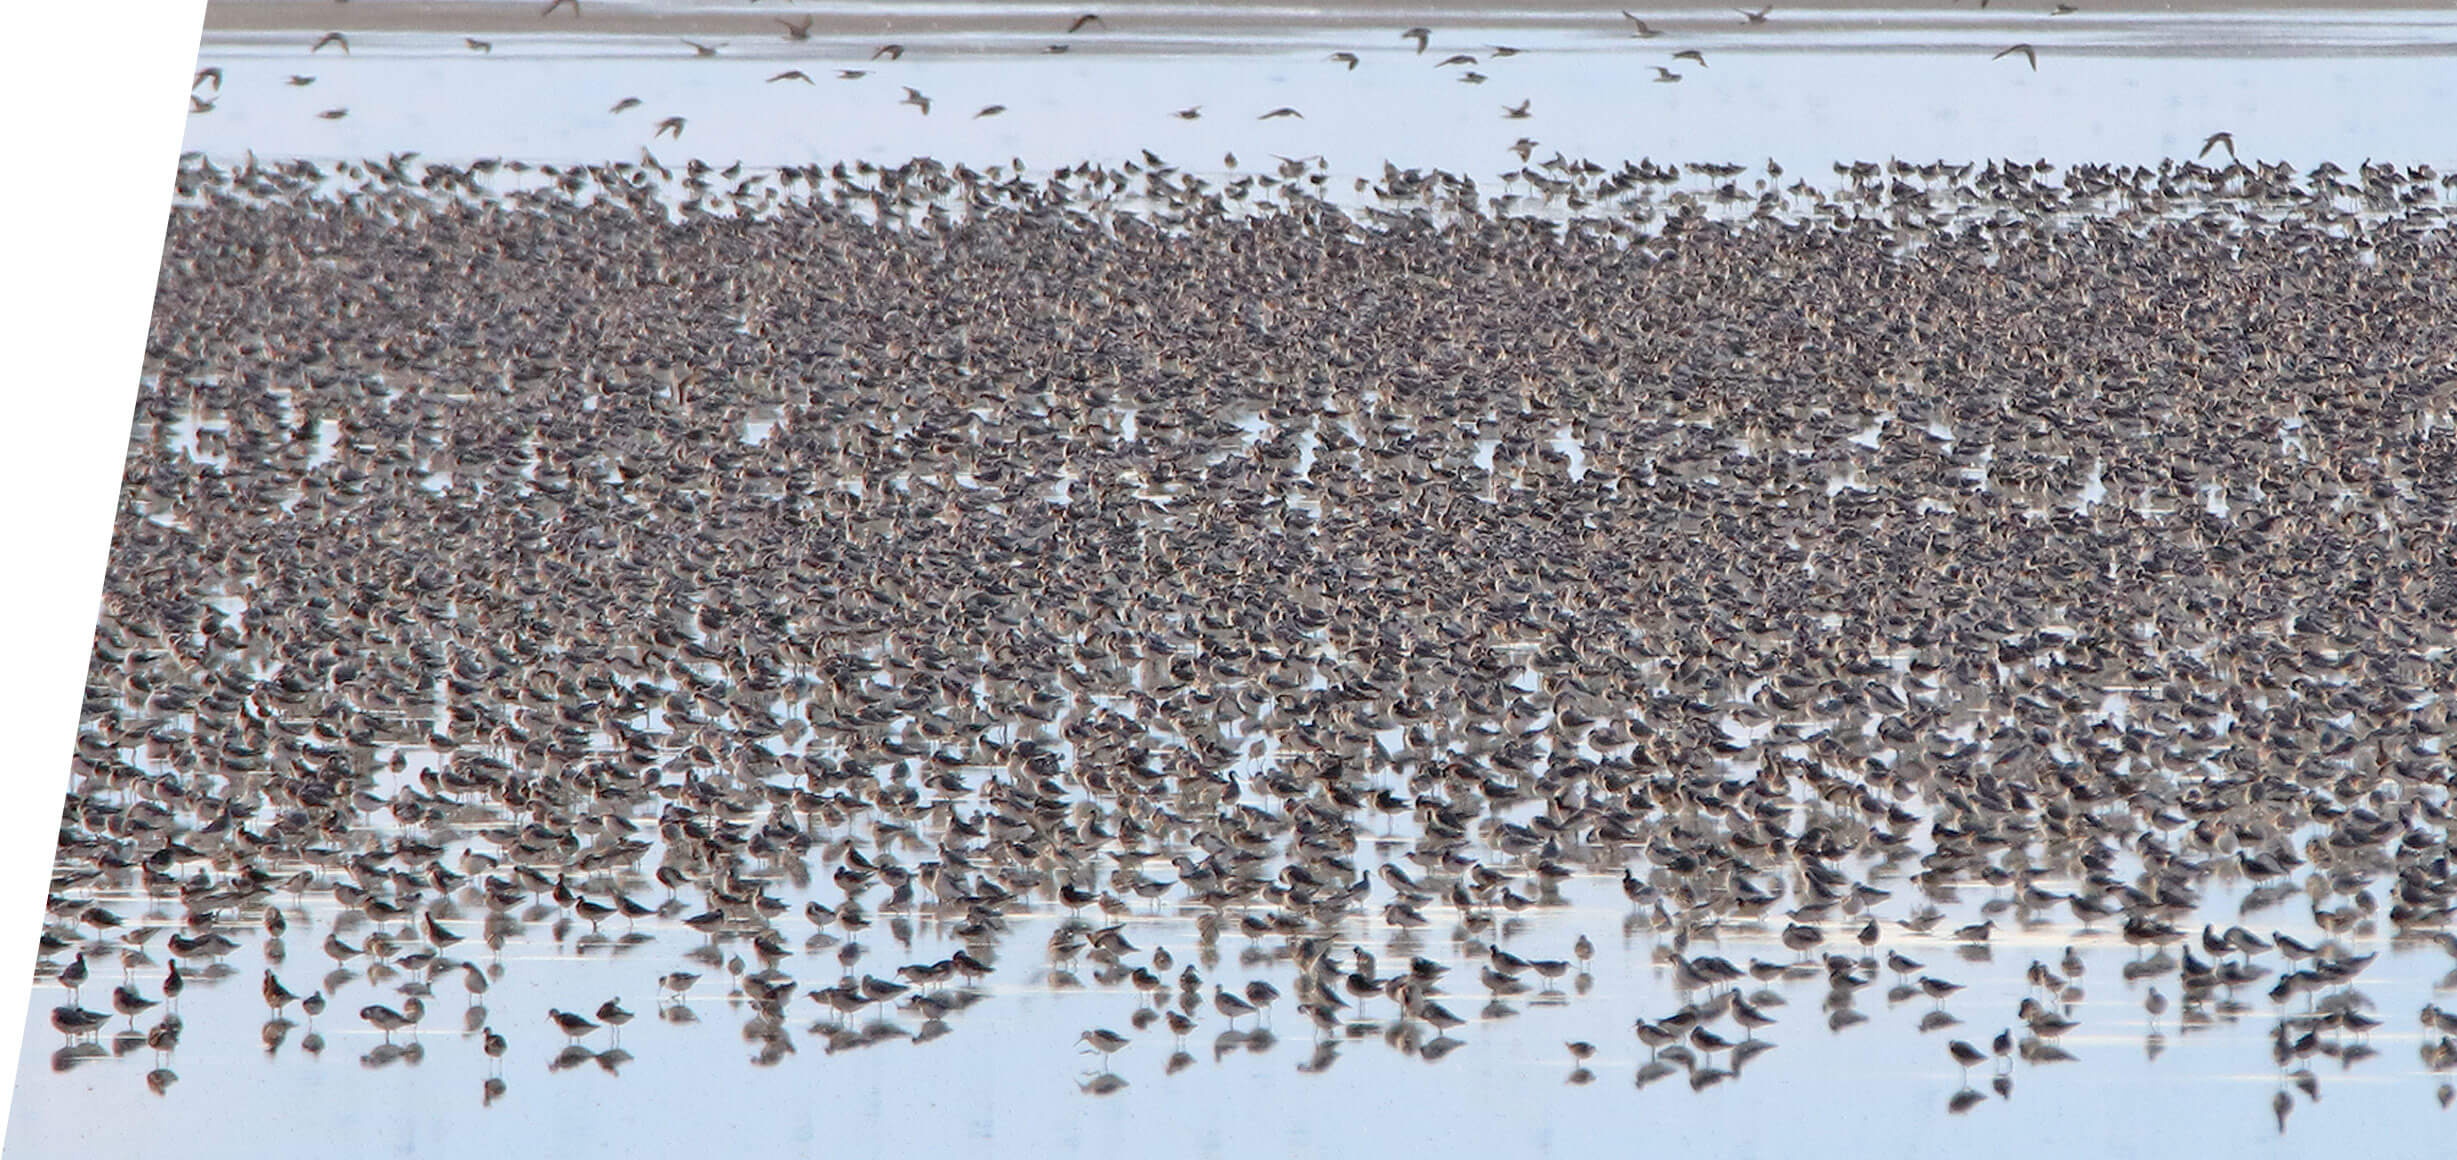 Wilson's and Red-necked Phalarope migration on the Great Salt Lake in 2018